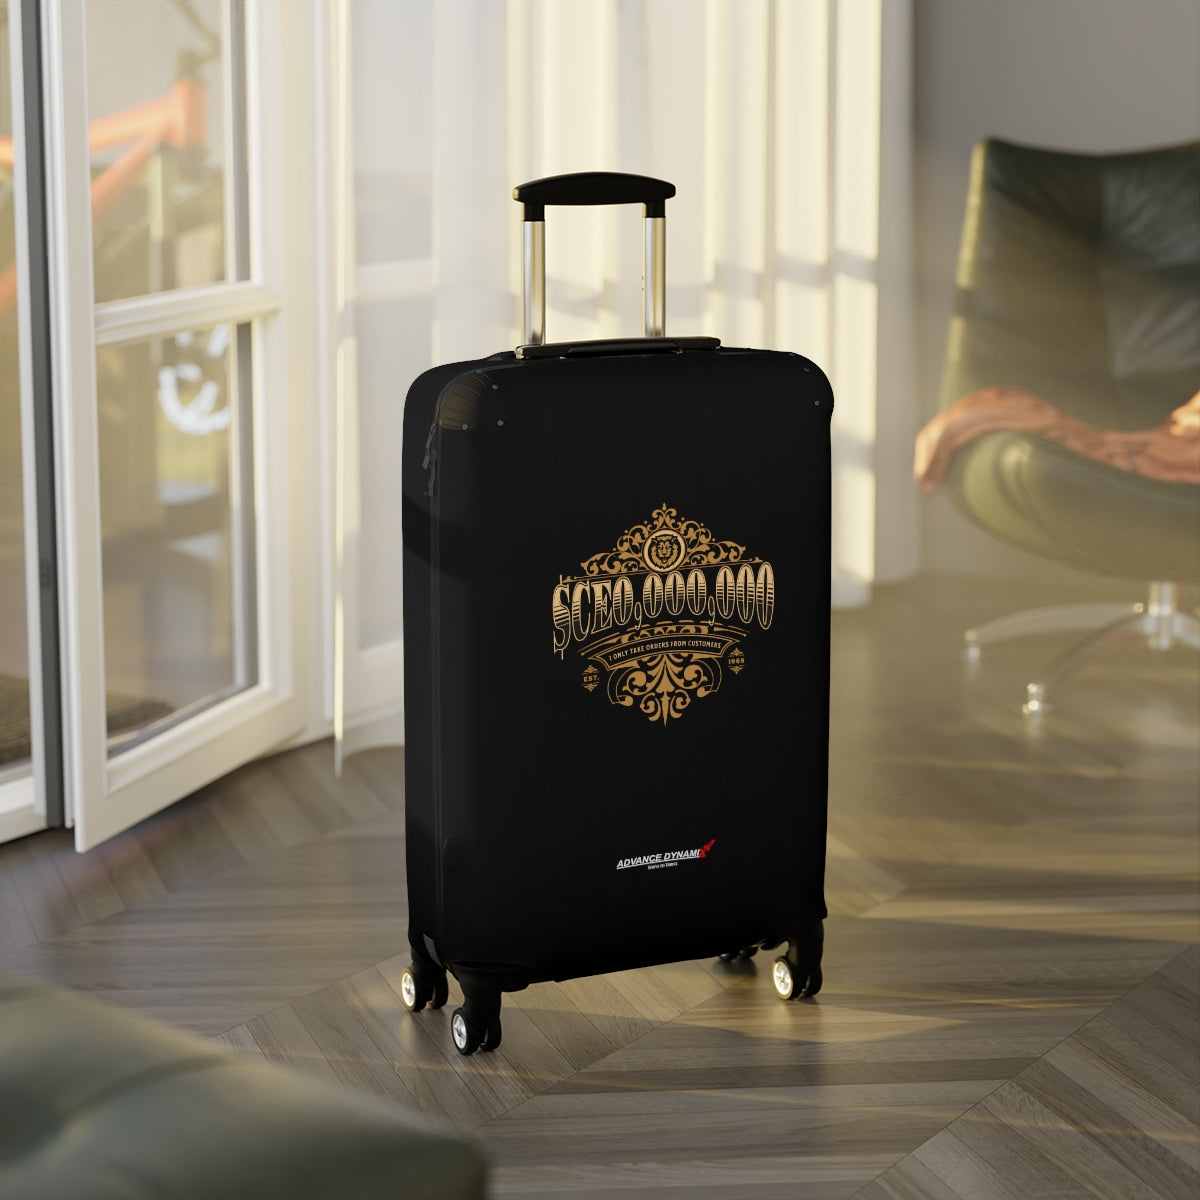 $CEO,000,000 - I only take orders from customers - Luggage Covers Infused with Advance Dynamix Add-A-Tude - Tell the world!